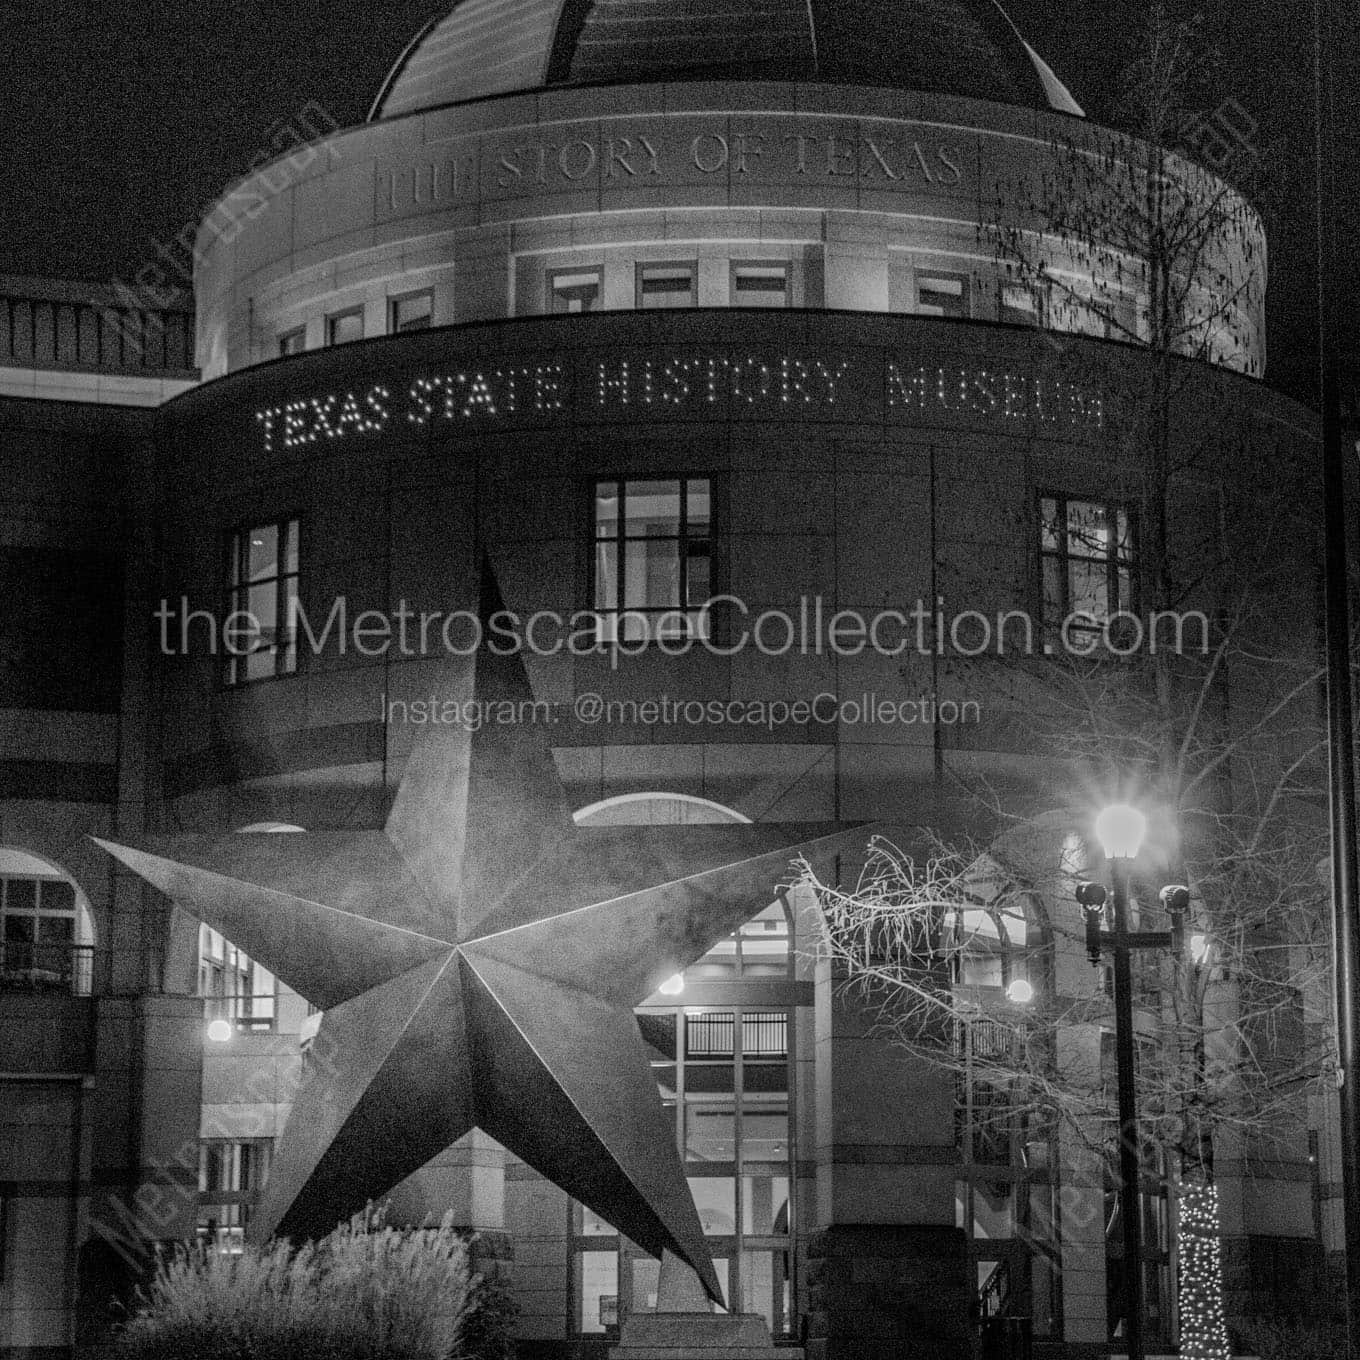 texas state history museum at night Black & White Office Art